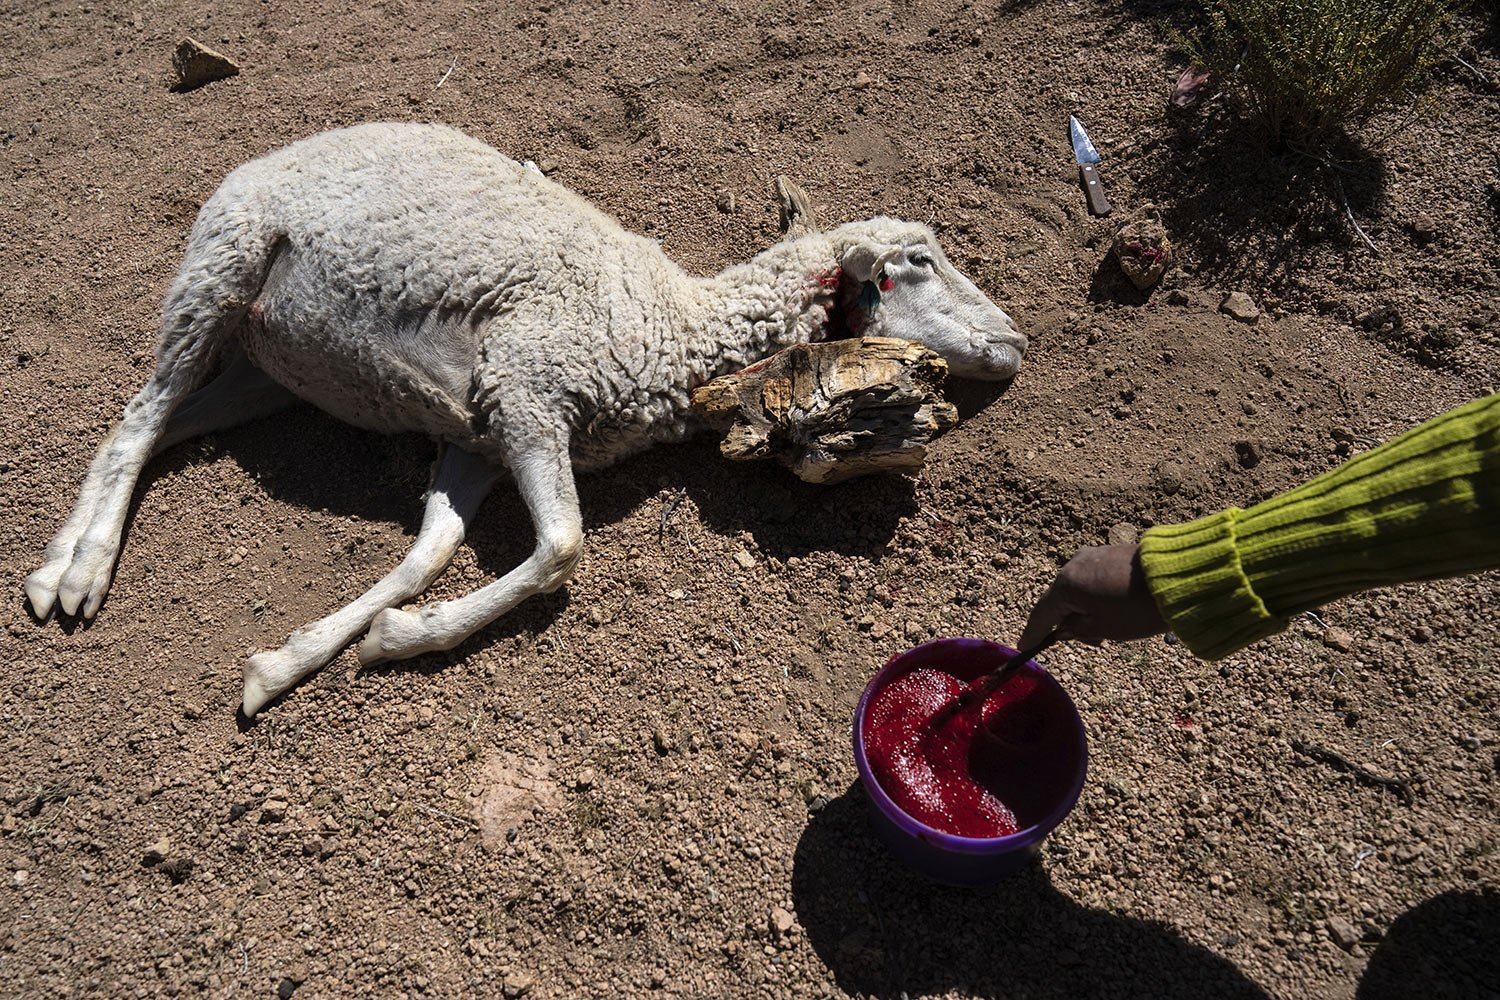  Vilma Callata, 45, collects blood from a slaughtered sheep in Tusaquillas, Jujuy Province, Argentina, April 23, 2023.  